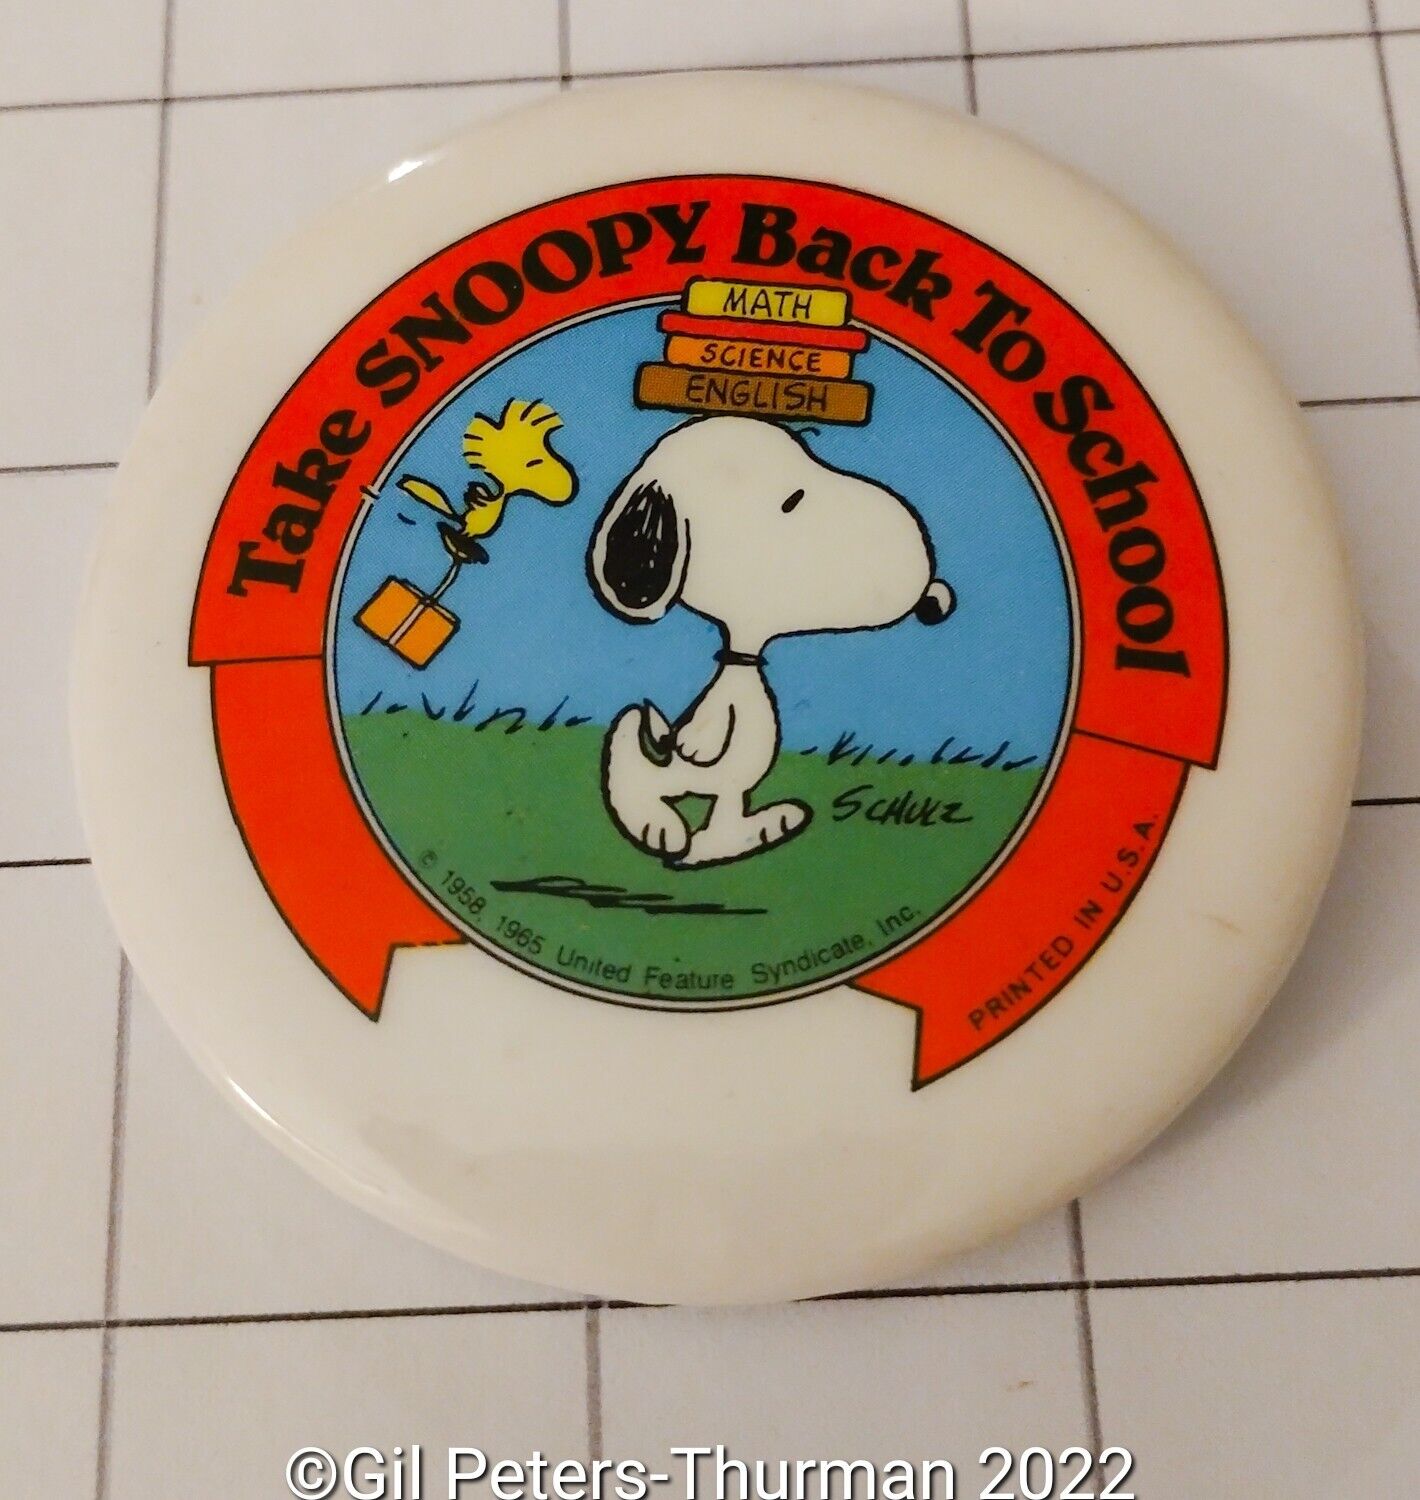 TAKE SNOOPY BACK TO SCHOOL BUTTON